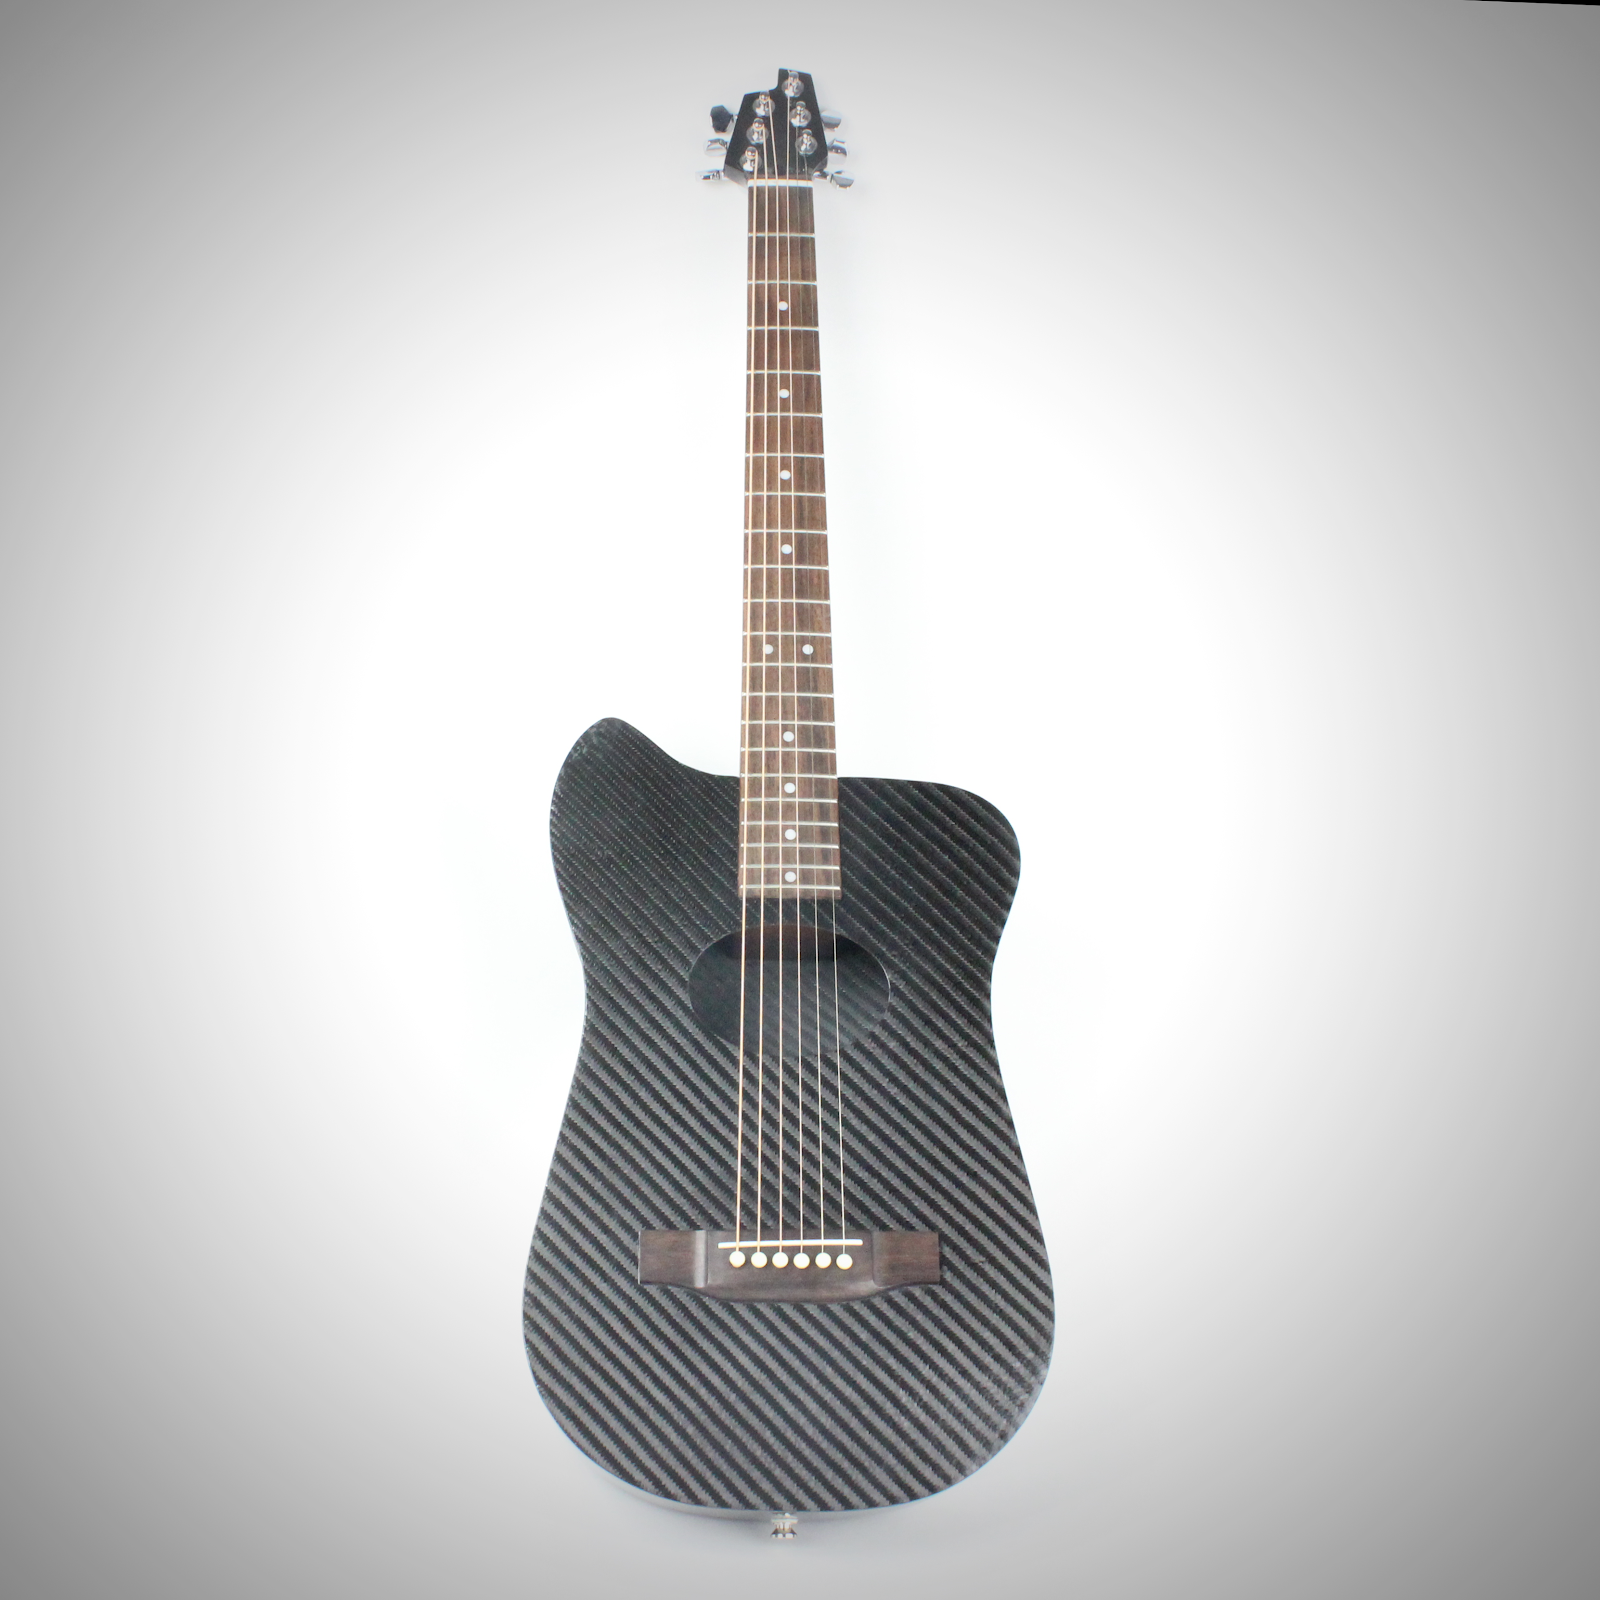 how-we-invented-a-carbon-fiber-guitar-and-grew-to-1m-year